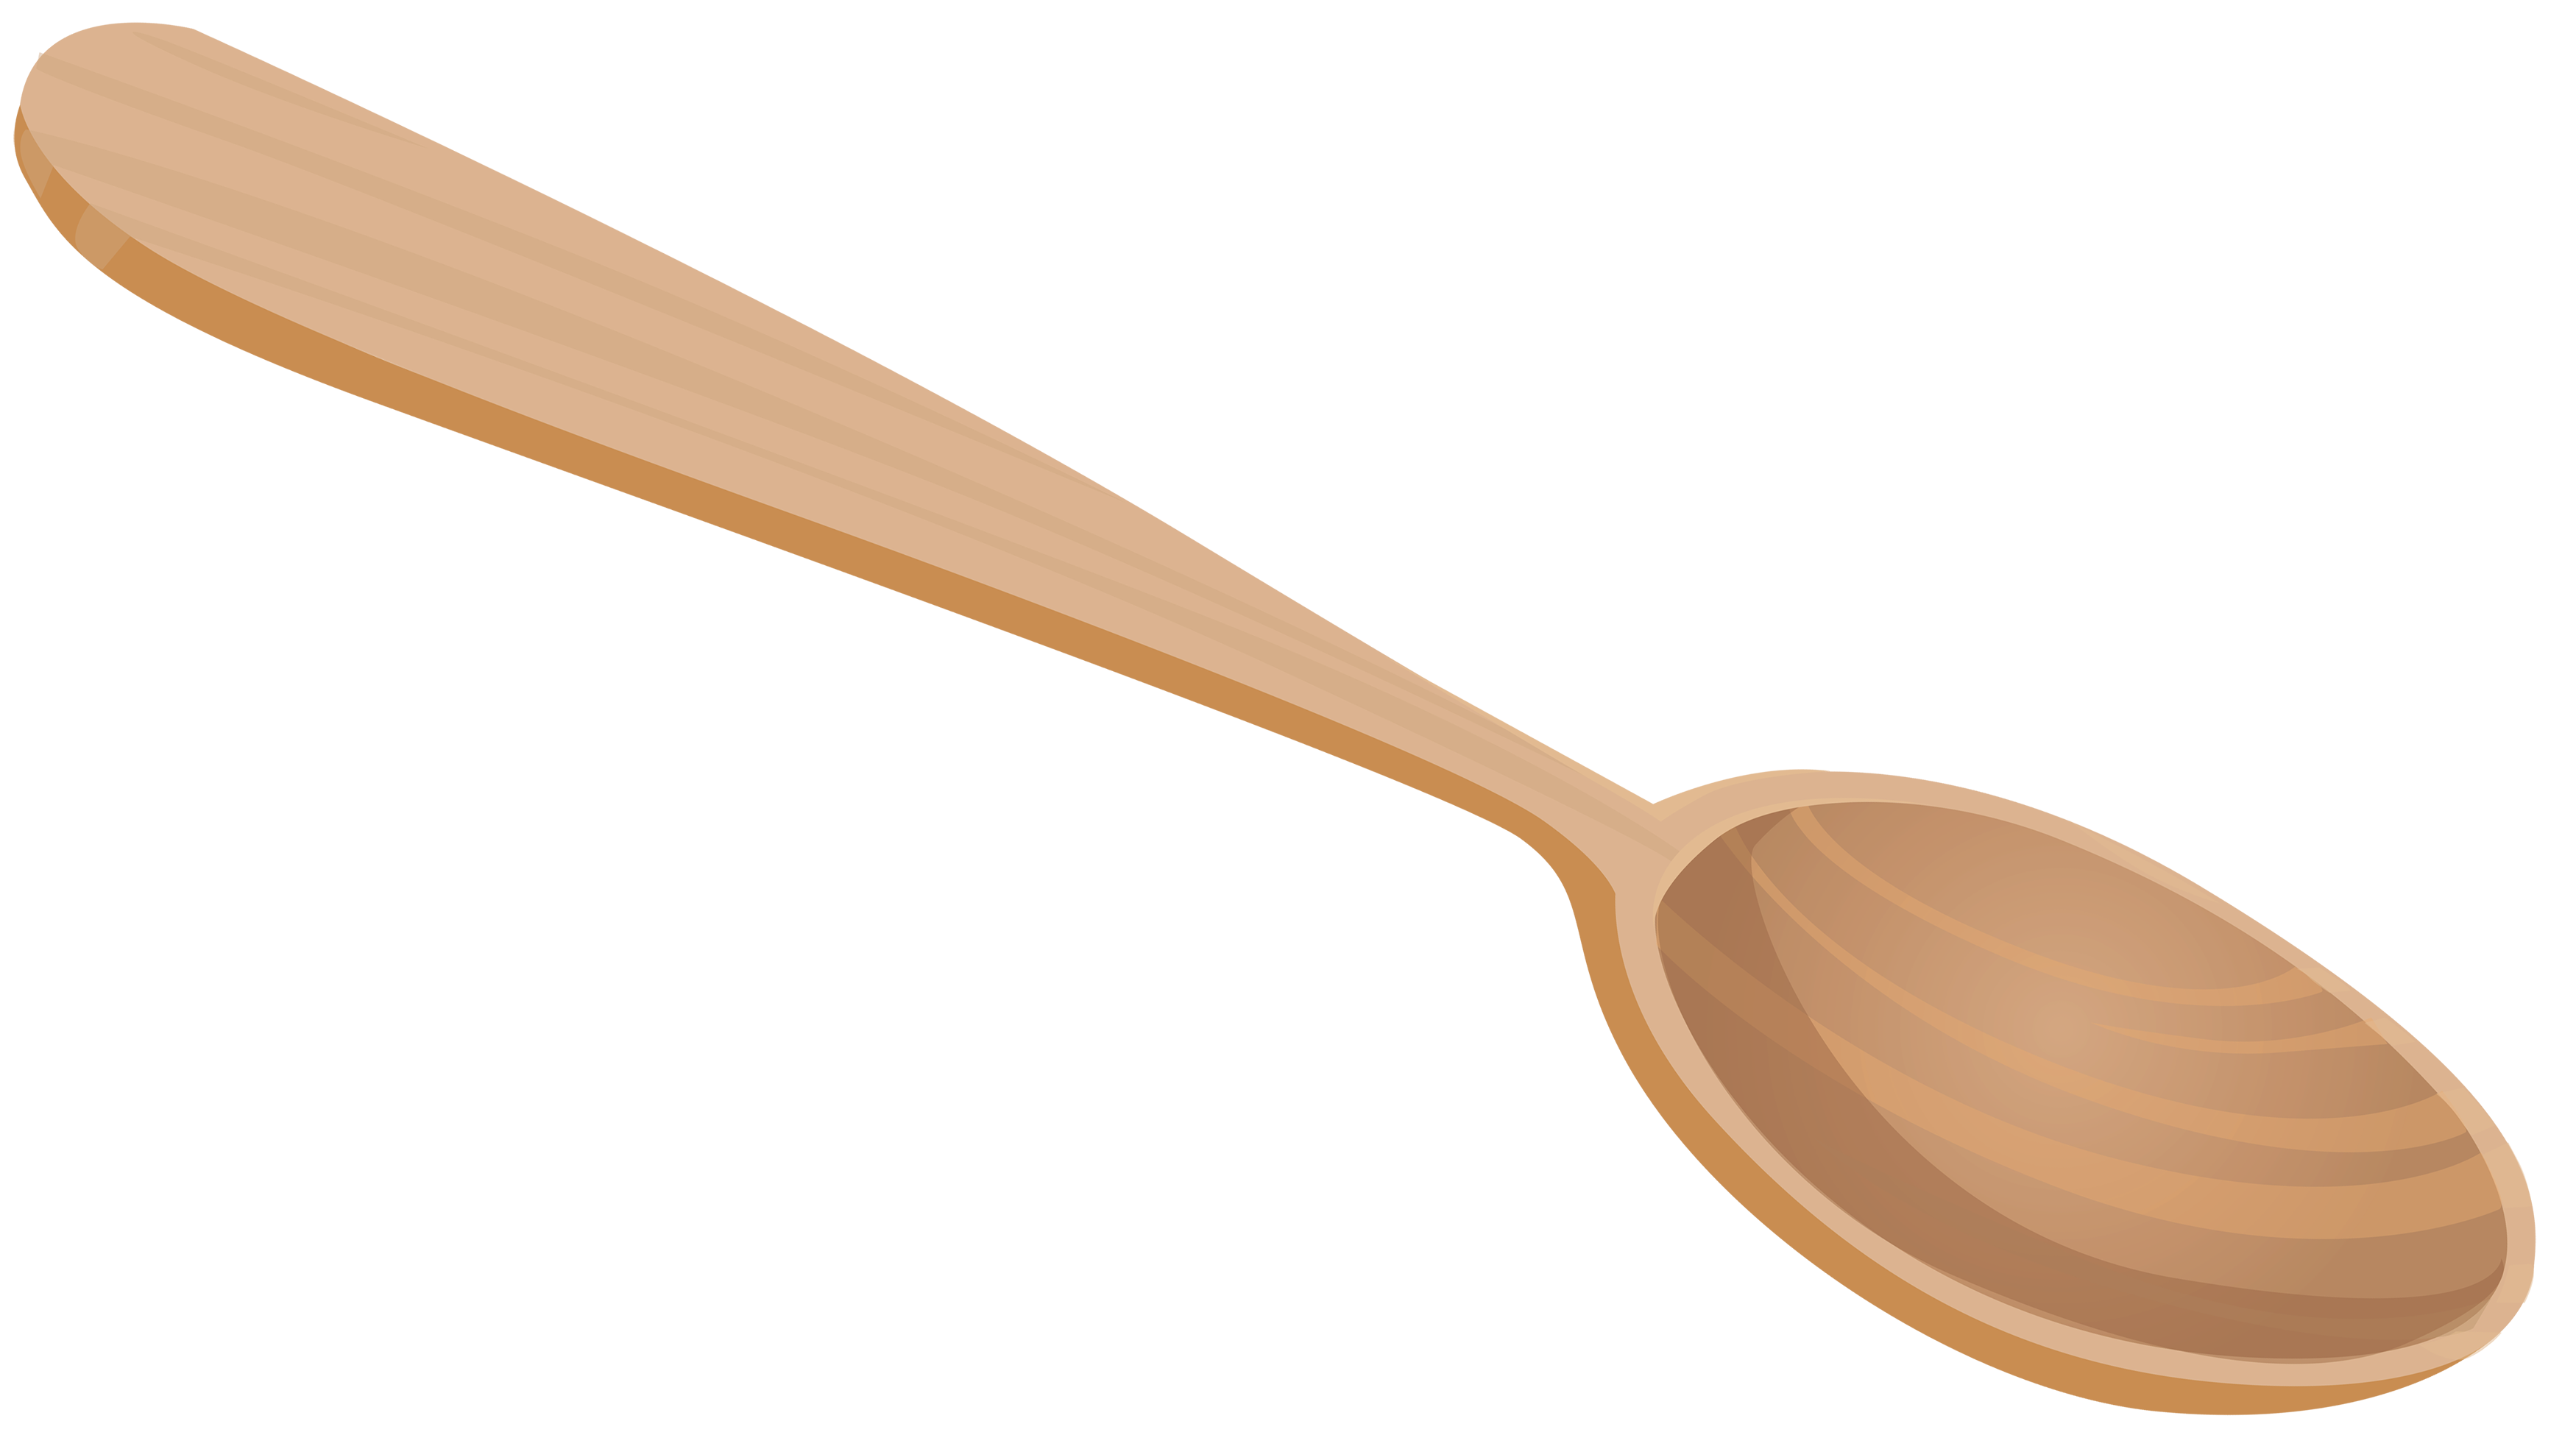 Steel Spoon PNG Clipart